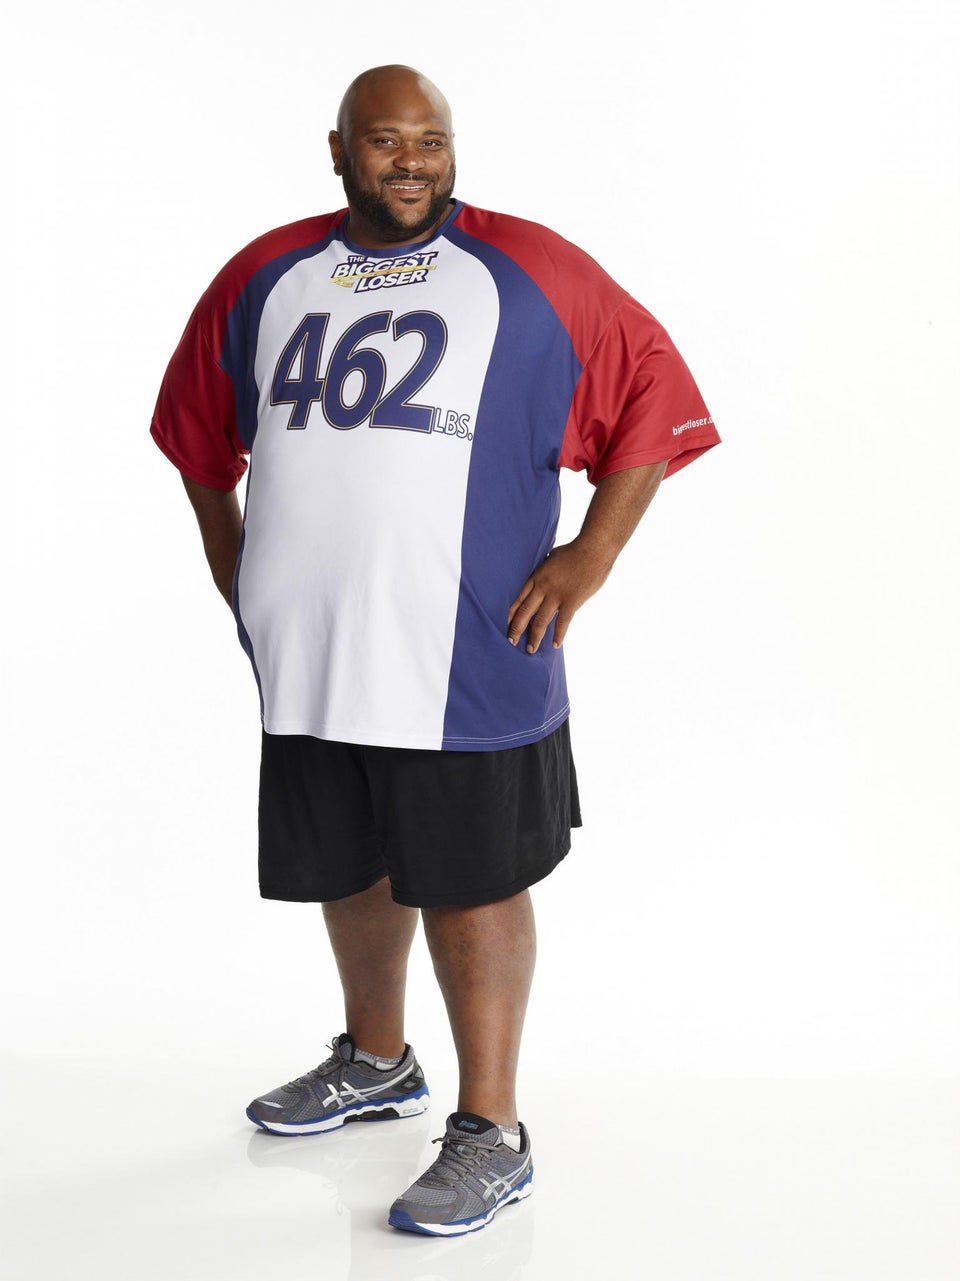 Ruben Studdard Diagnosed with Diabetes on ‘Biggest Loser’